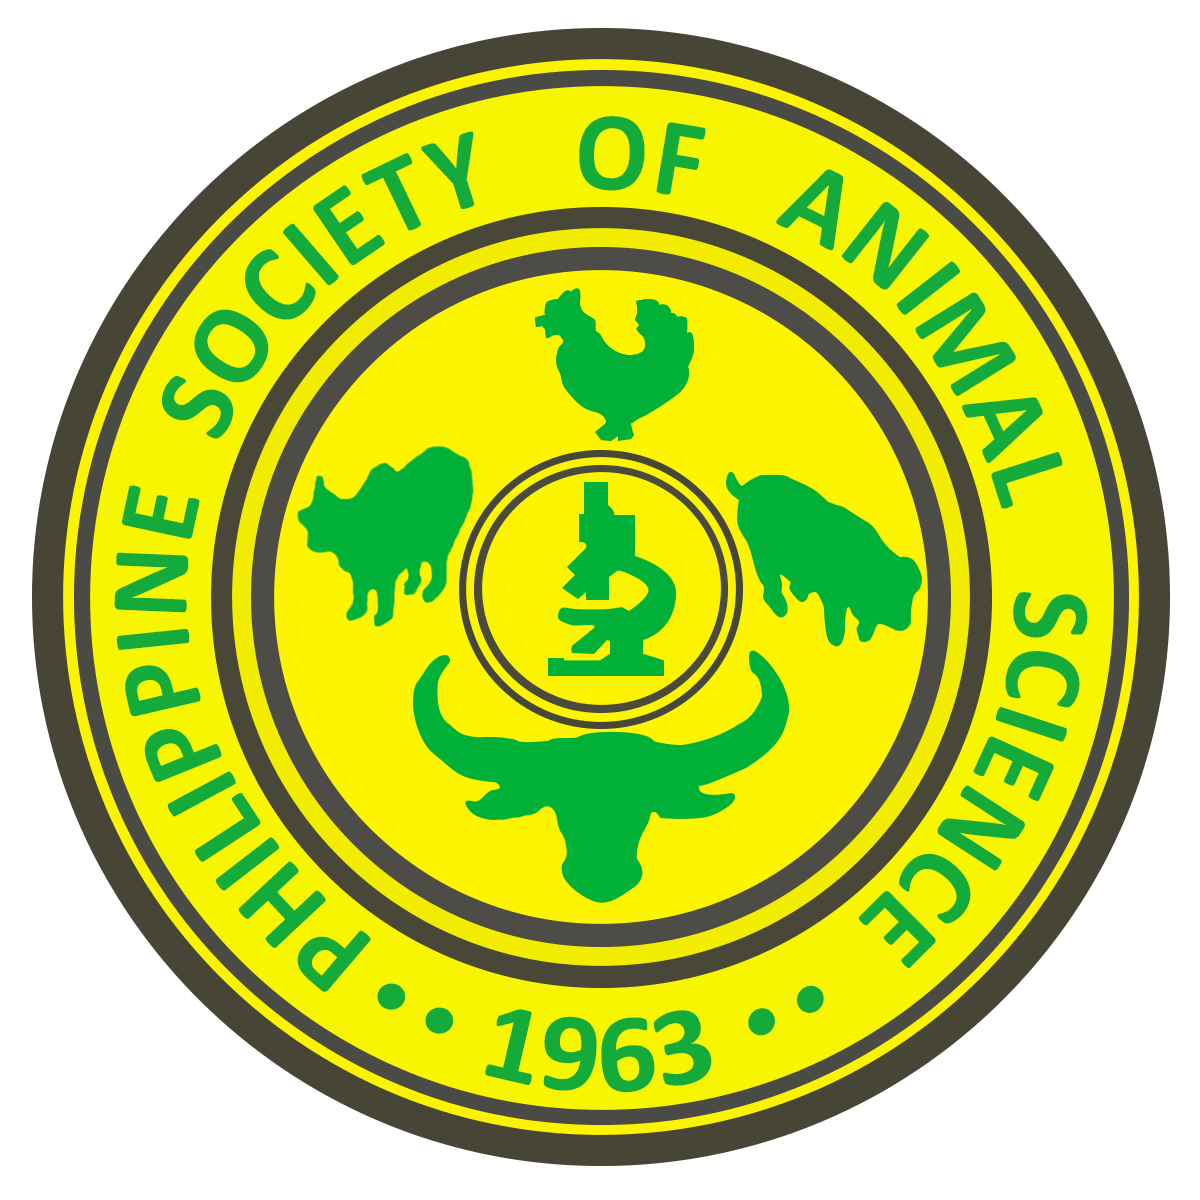 About | Philippine Society of Animal Science